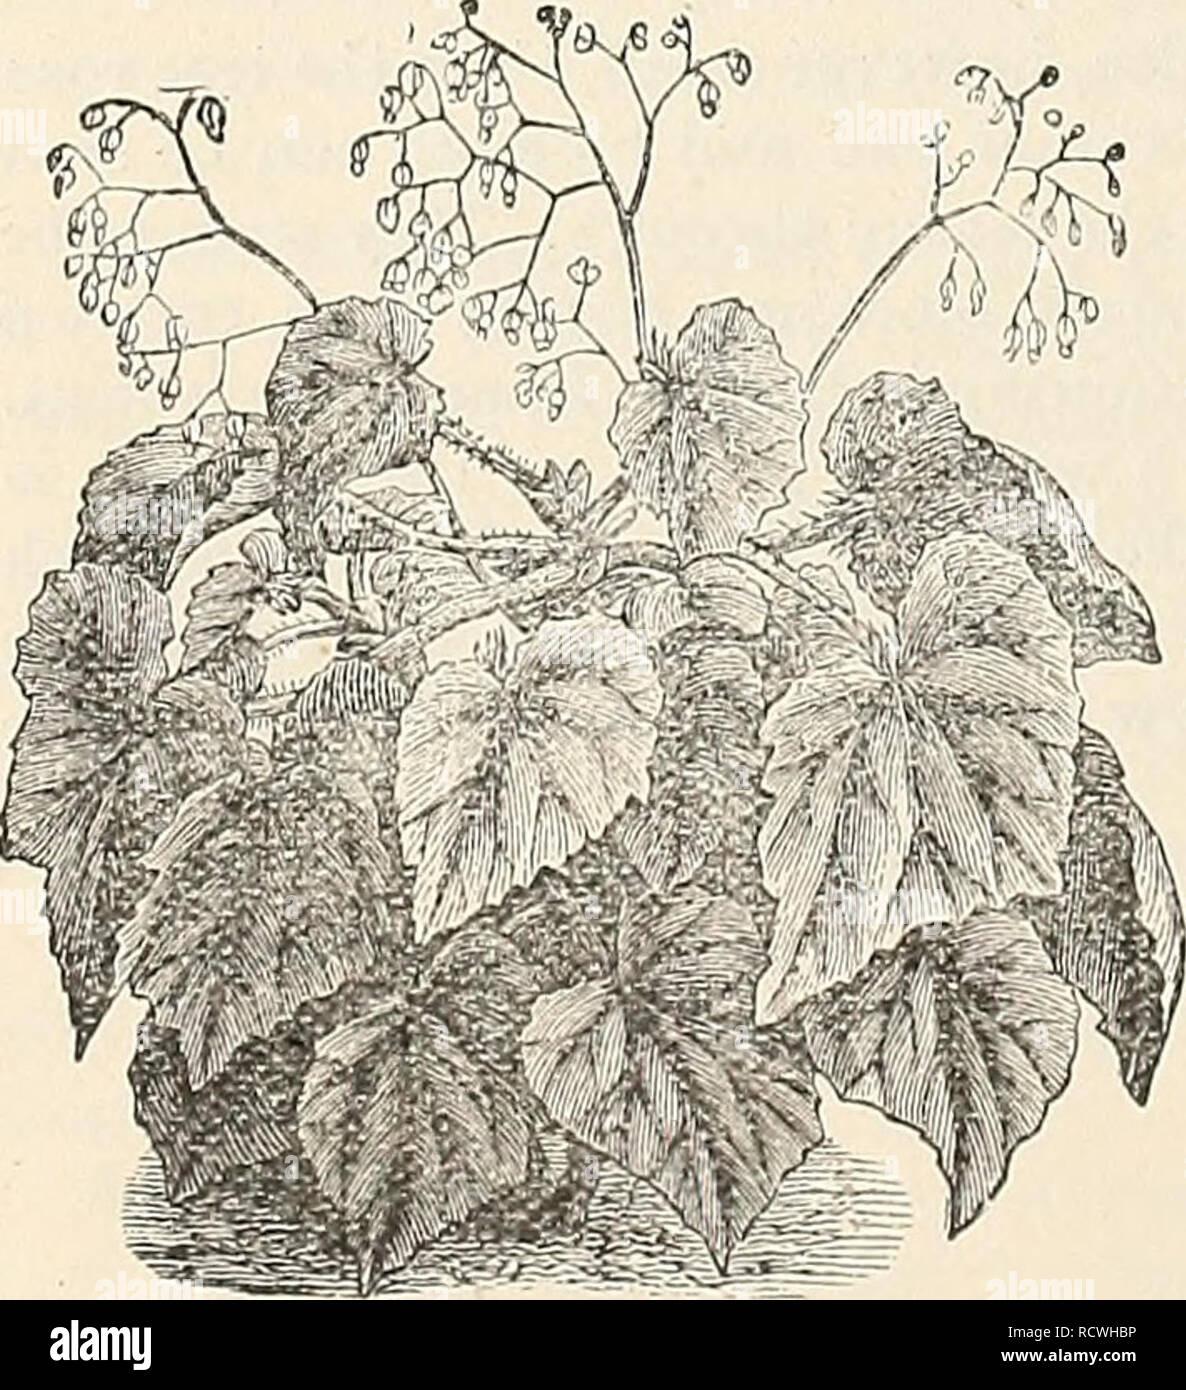 . Descriptive catalogue of the Jewell Nursery Co. Nursery stock Minnesota Catalogs; Plants, Ornamental Catalogs; Fruit Catalogs; Flowers Catalogs. REX liEGGNIA.. FLOWERING BEGONIA. FI.,0WE;5S.ING VASIIETIES. Alfoa Piifila.-Leaves glossy green, thickly spotted, silvery wliite. Arg'CSitea GMitata.—  cross b?tween Olbia and Alba Picta. Purple bronze leaves, oblong in shape, with silvery marln'ngs. Wh.ite flowers on the tips of the stems. It has the silvery blotches of Alba Picta, and beautiful form of Olbia. Semperfloire?.''.^') Elcgaxis.—Has'acompact mass of mediimi size, glossj', olive-green l Stock Photo